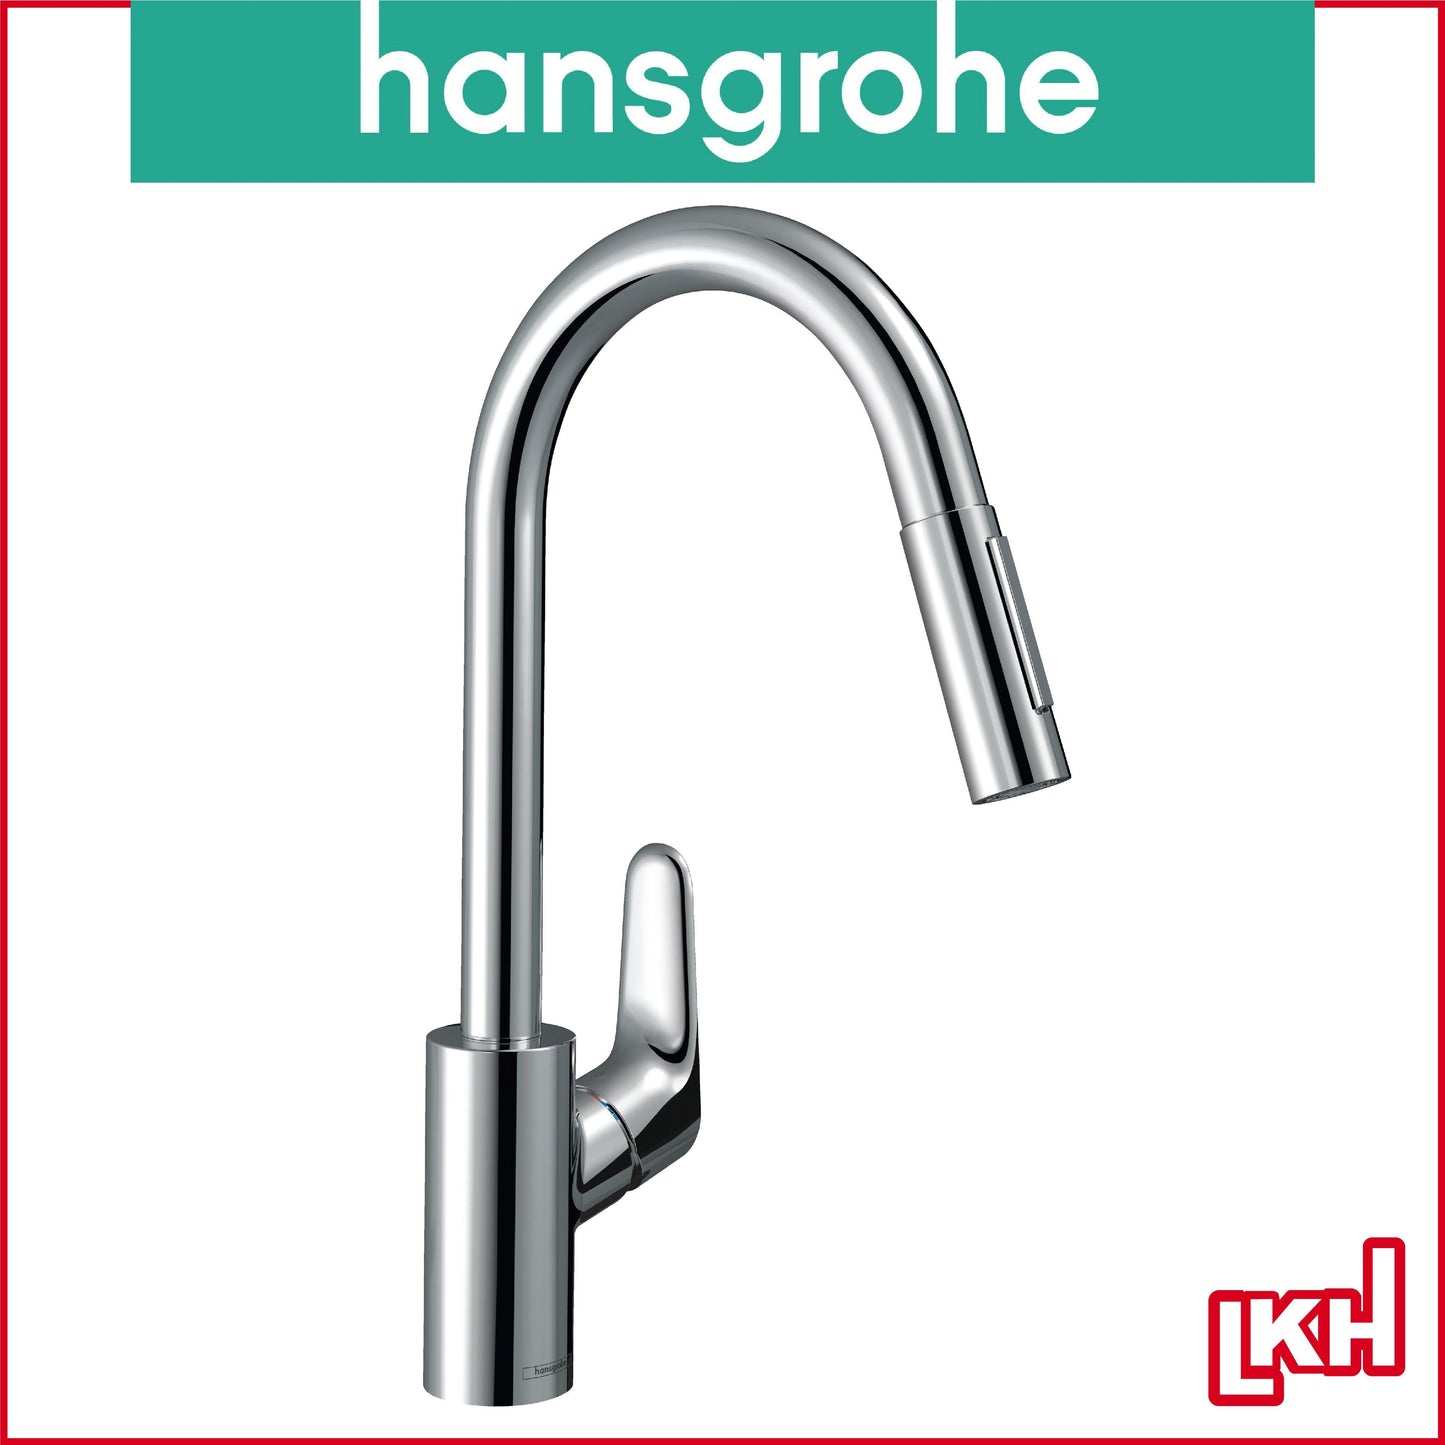 hansgrohe 31833000 kitchen sink mixer with pull out spray